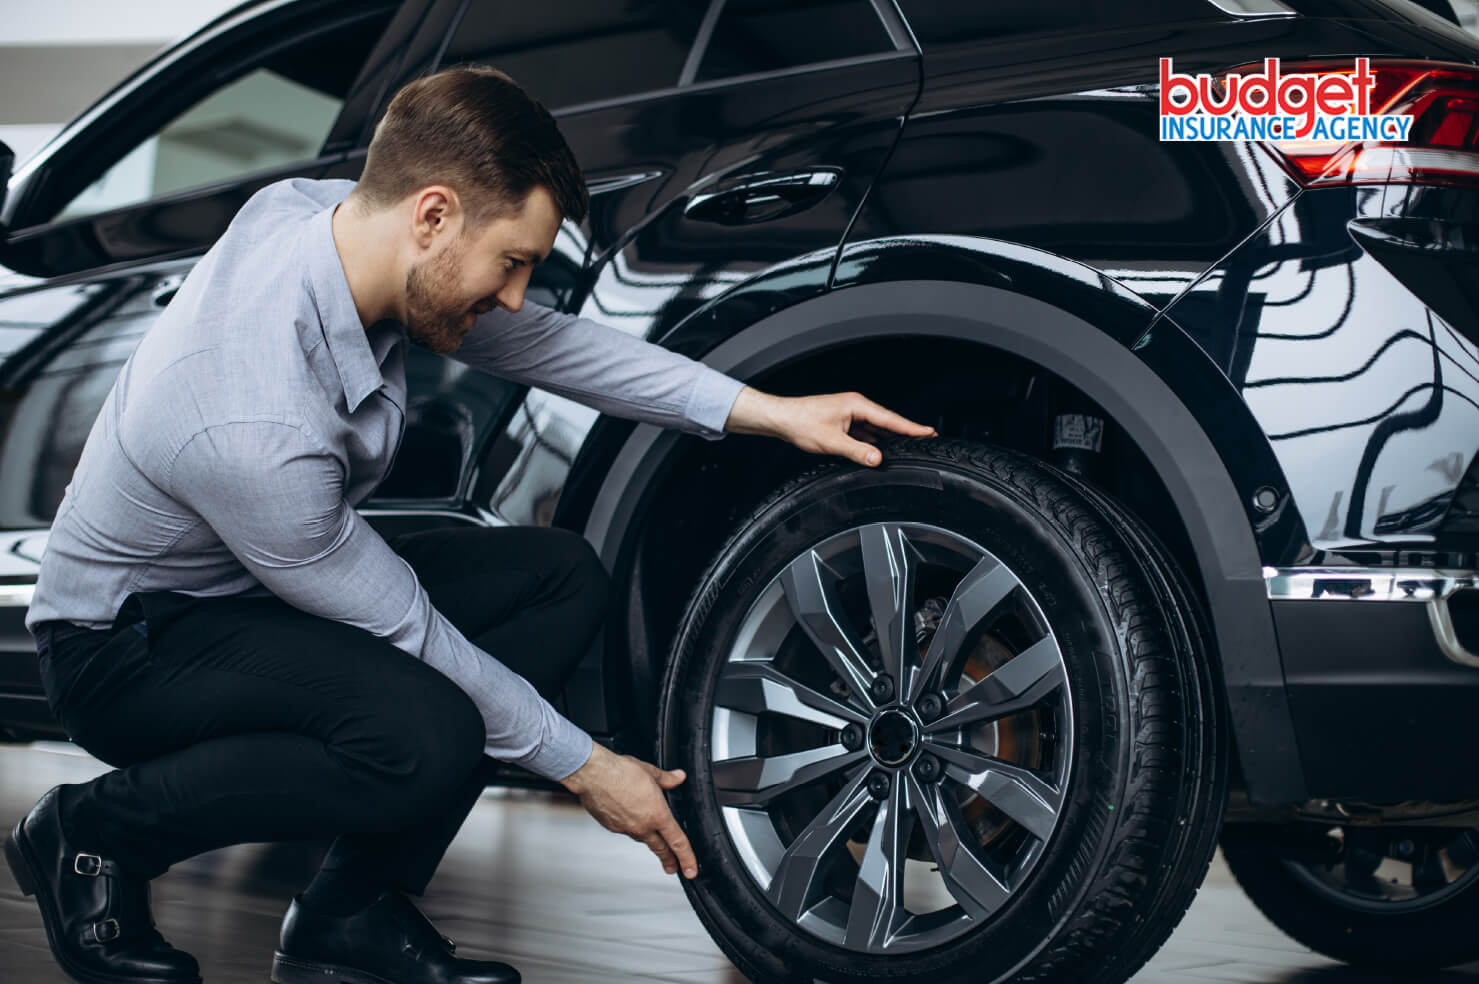 Tire Damage Coverage: Does My Car Insurance Protect Me?